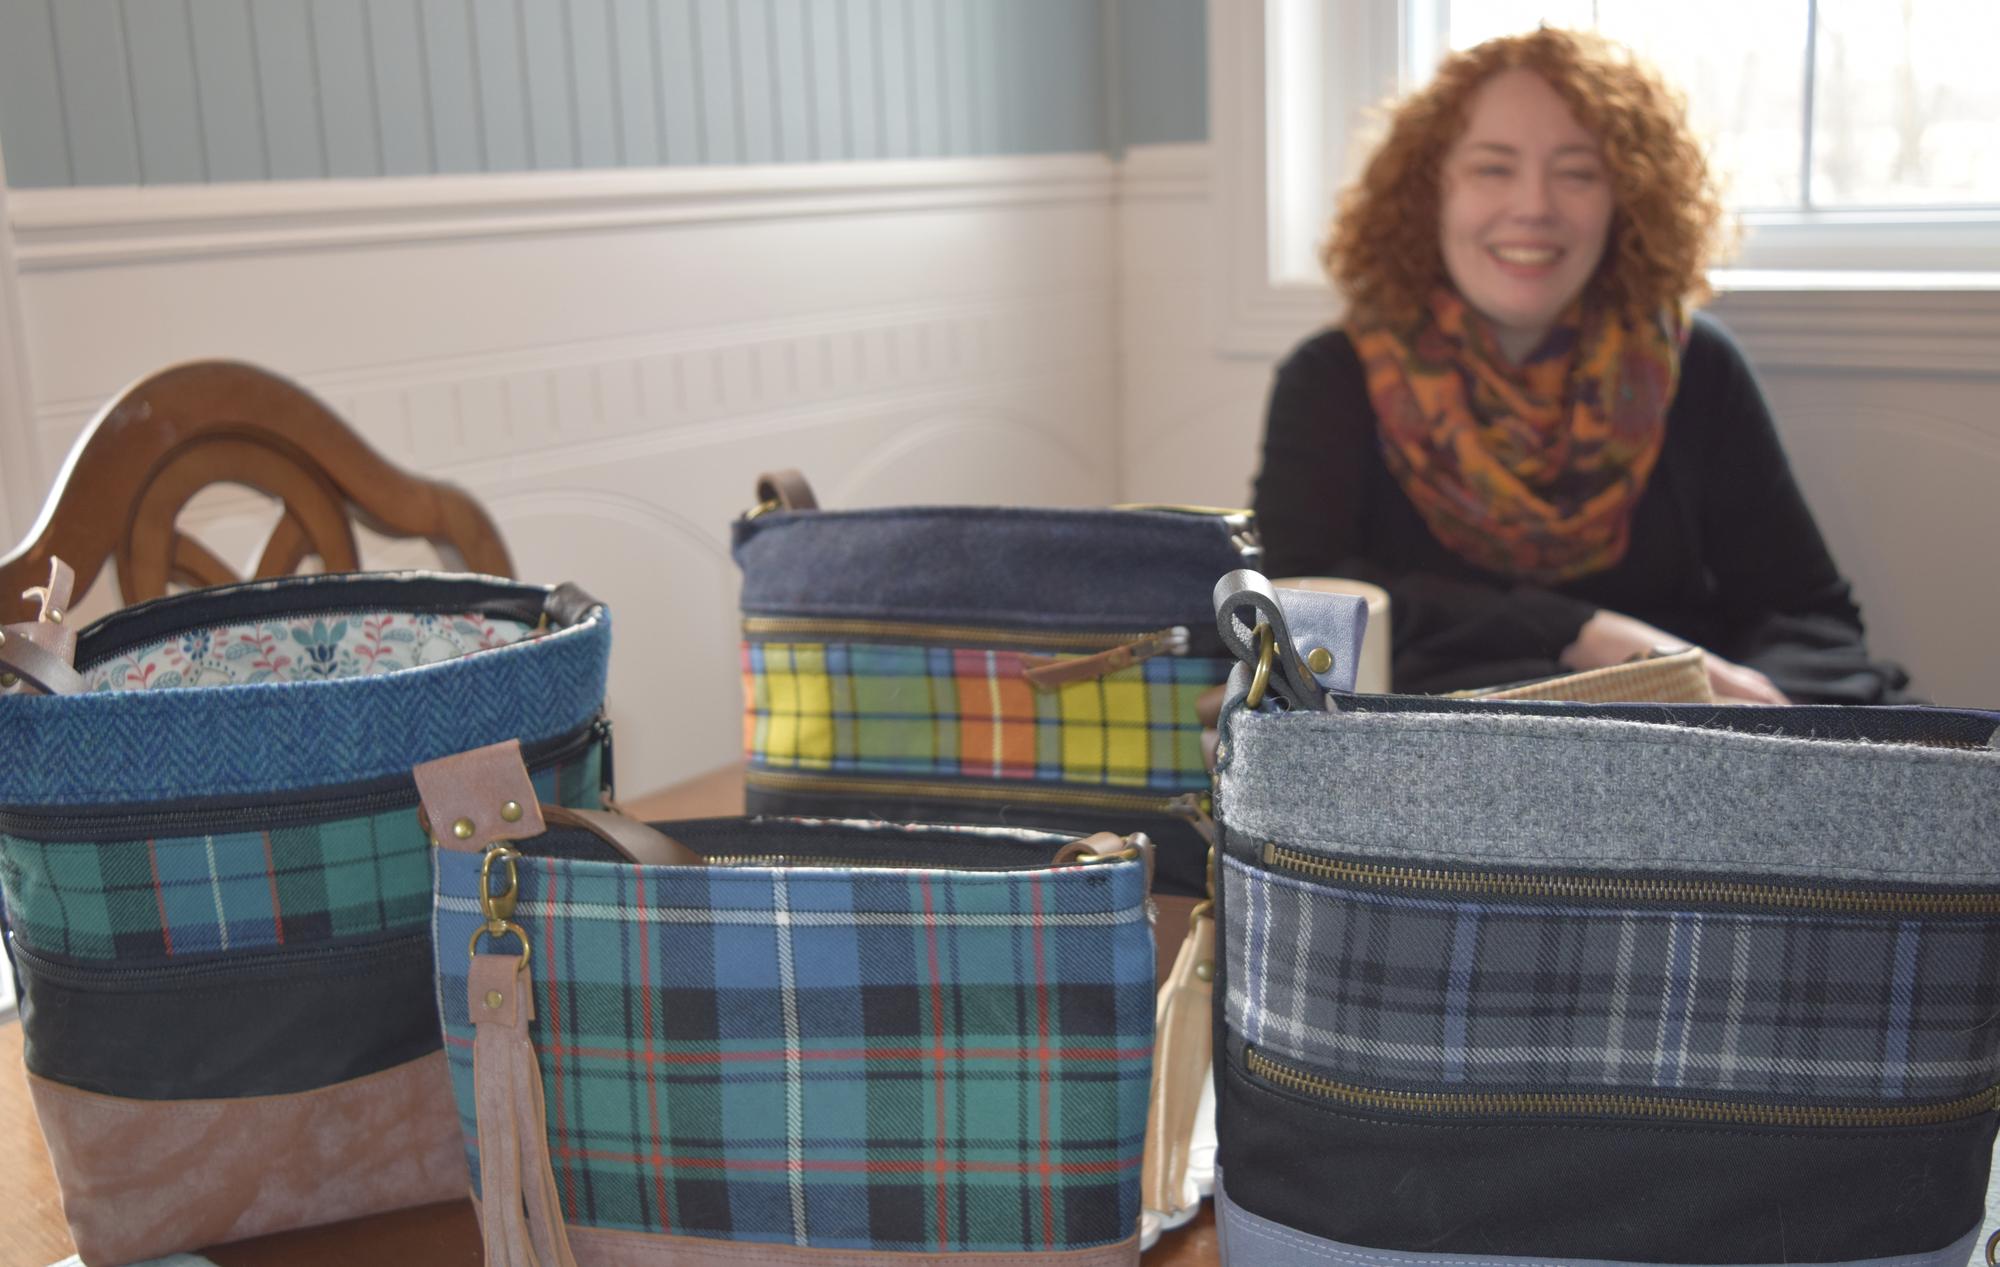 Misneach puts courage and clan in every bag